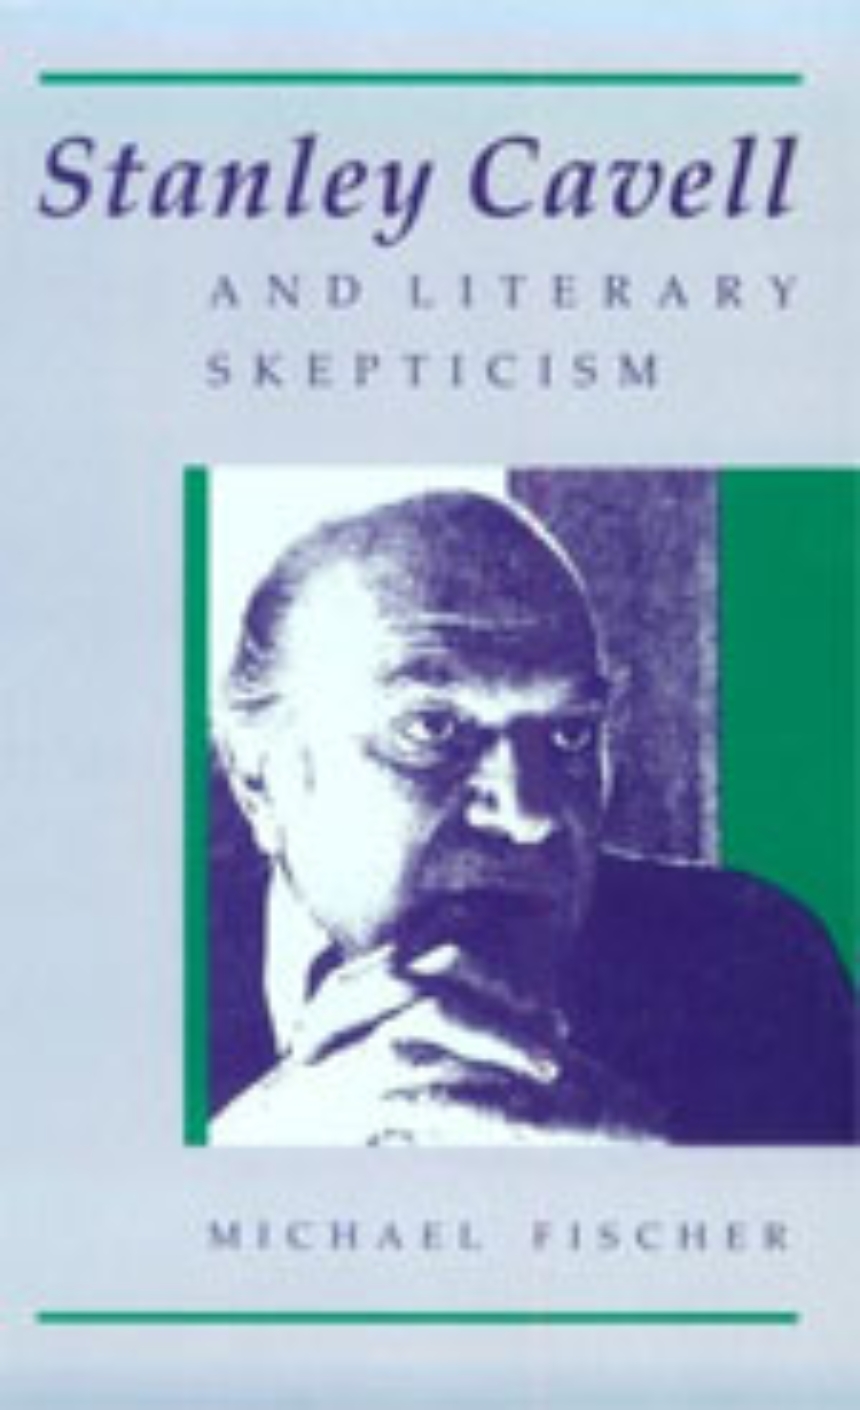 Stanley Cavell and Literary Skepticism, Fischer